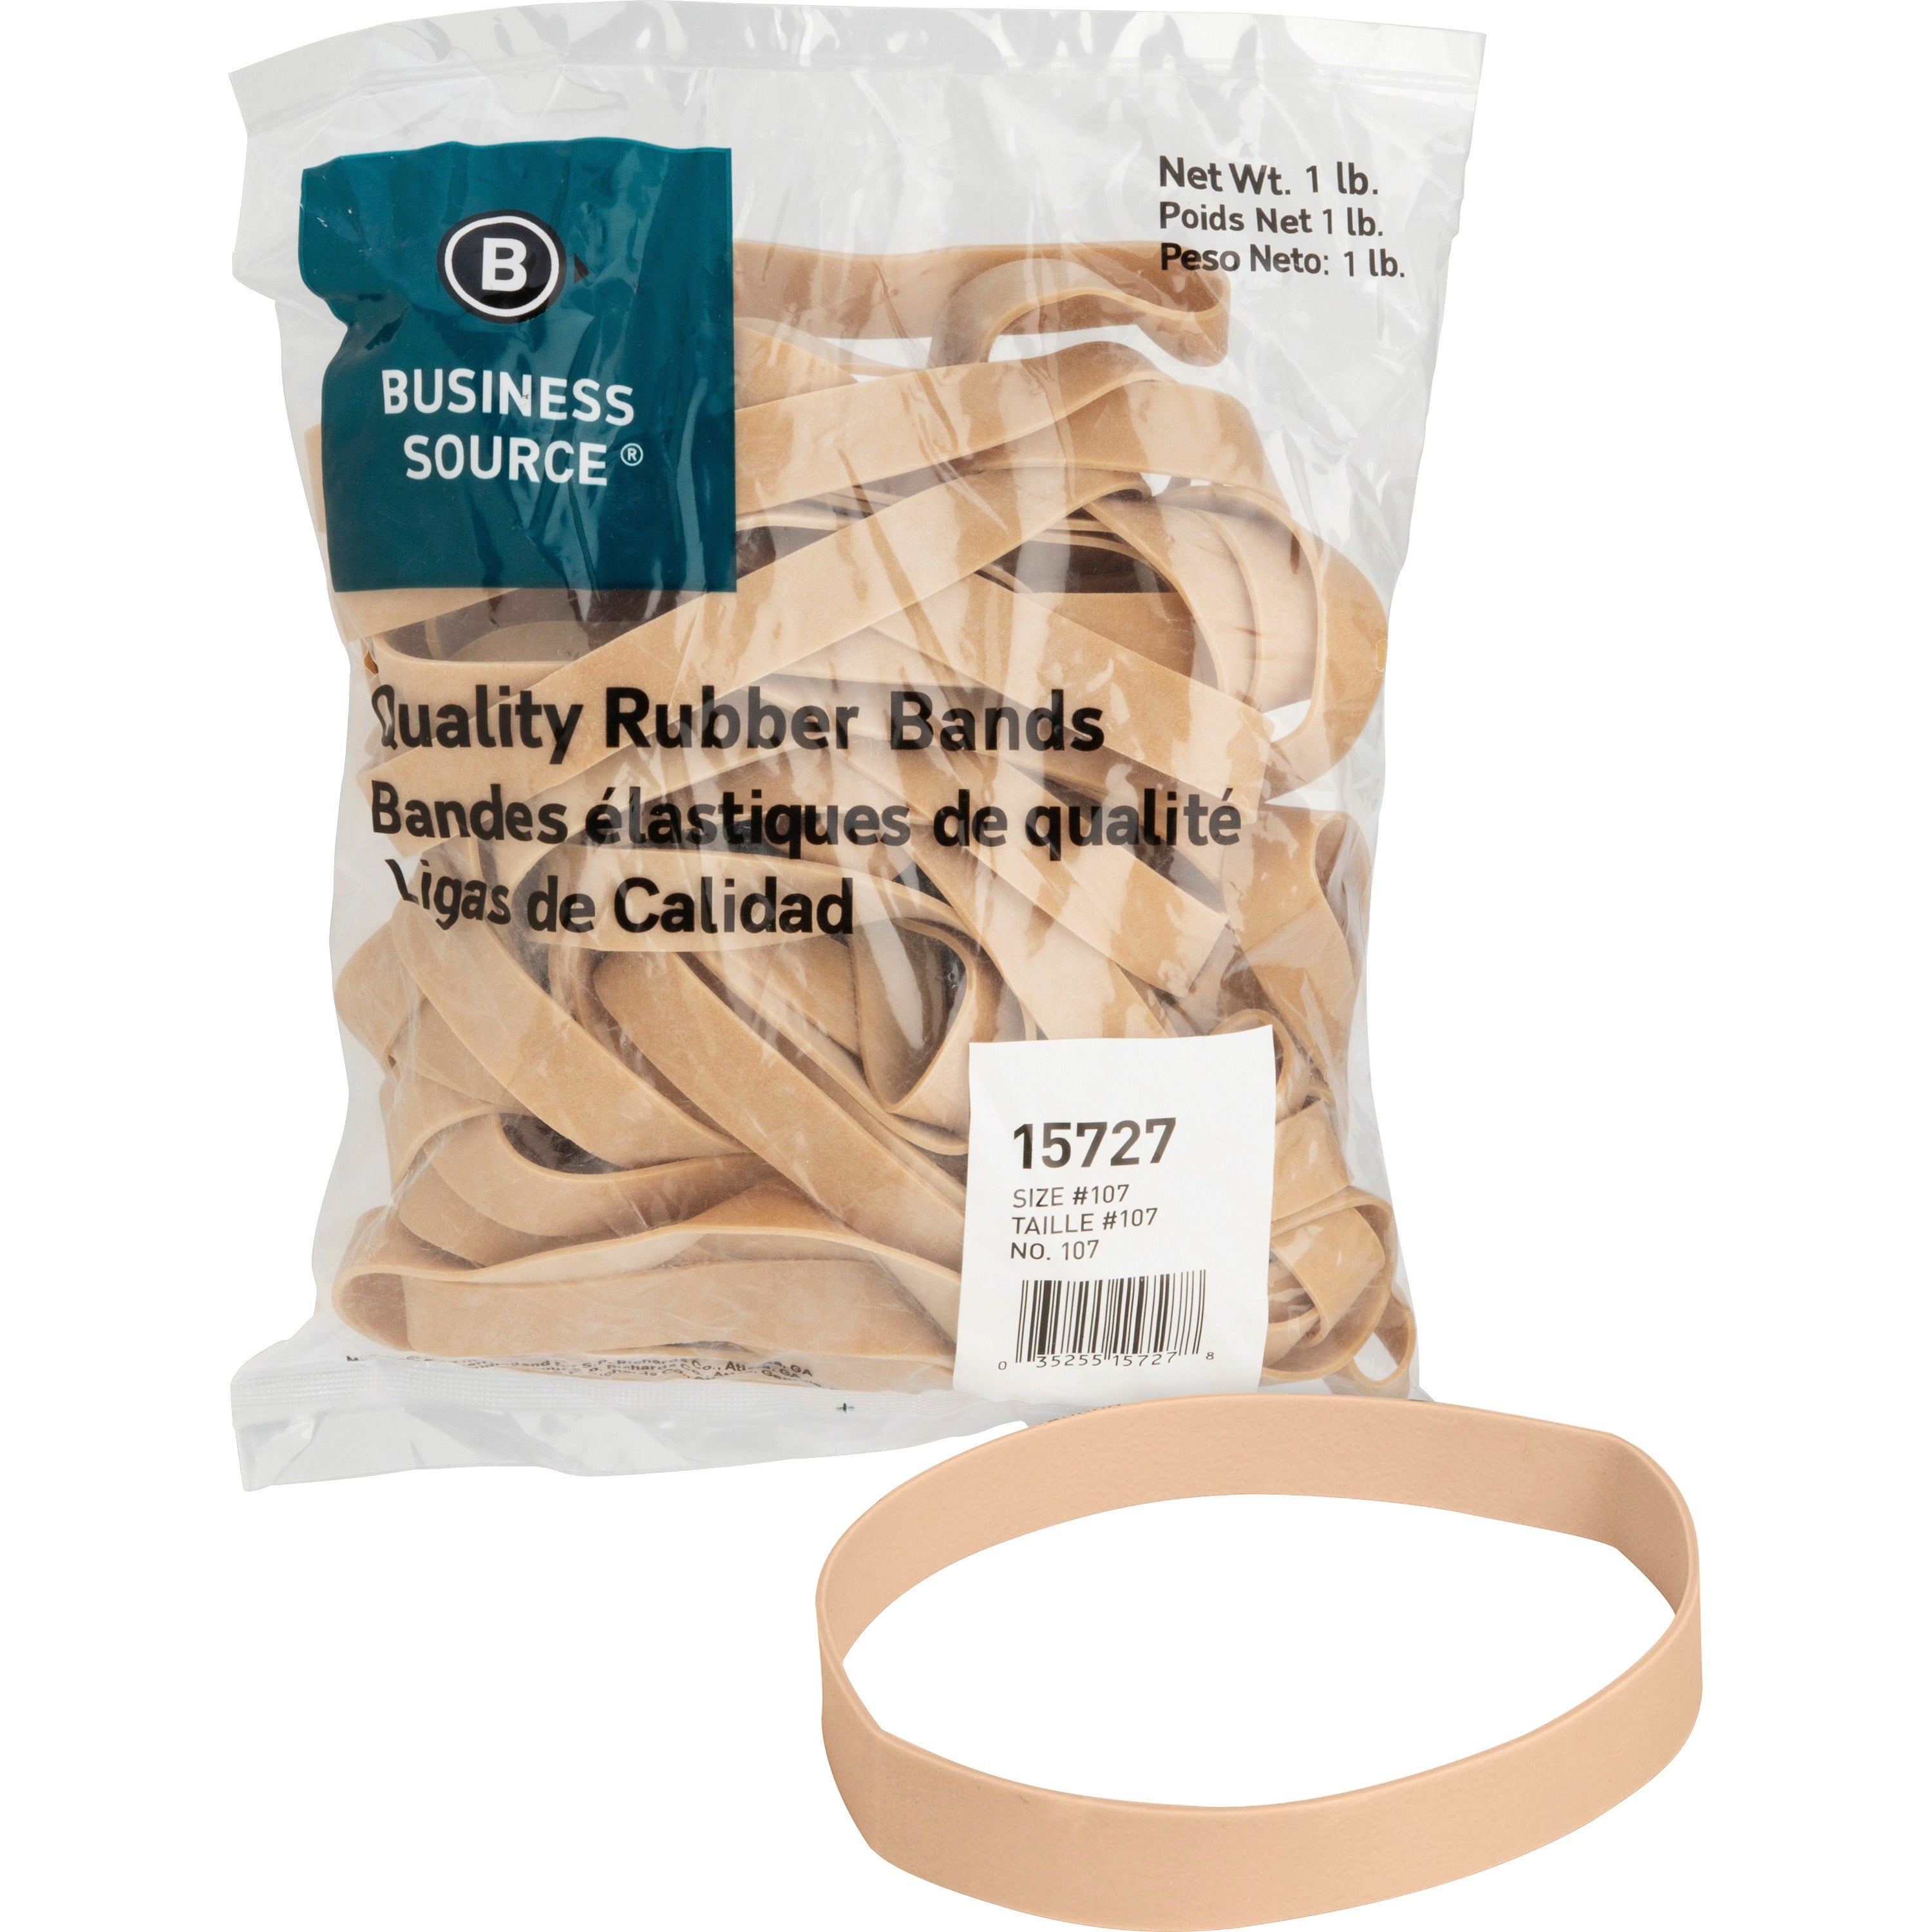 Business Source Quality Rubber Bands - Size: #107 - 7" Length x 0.6" Width - Sustainable - 40 / Pack - Rubber - Crepe - 